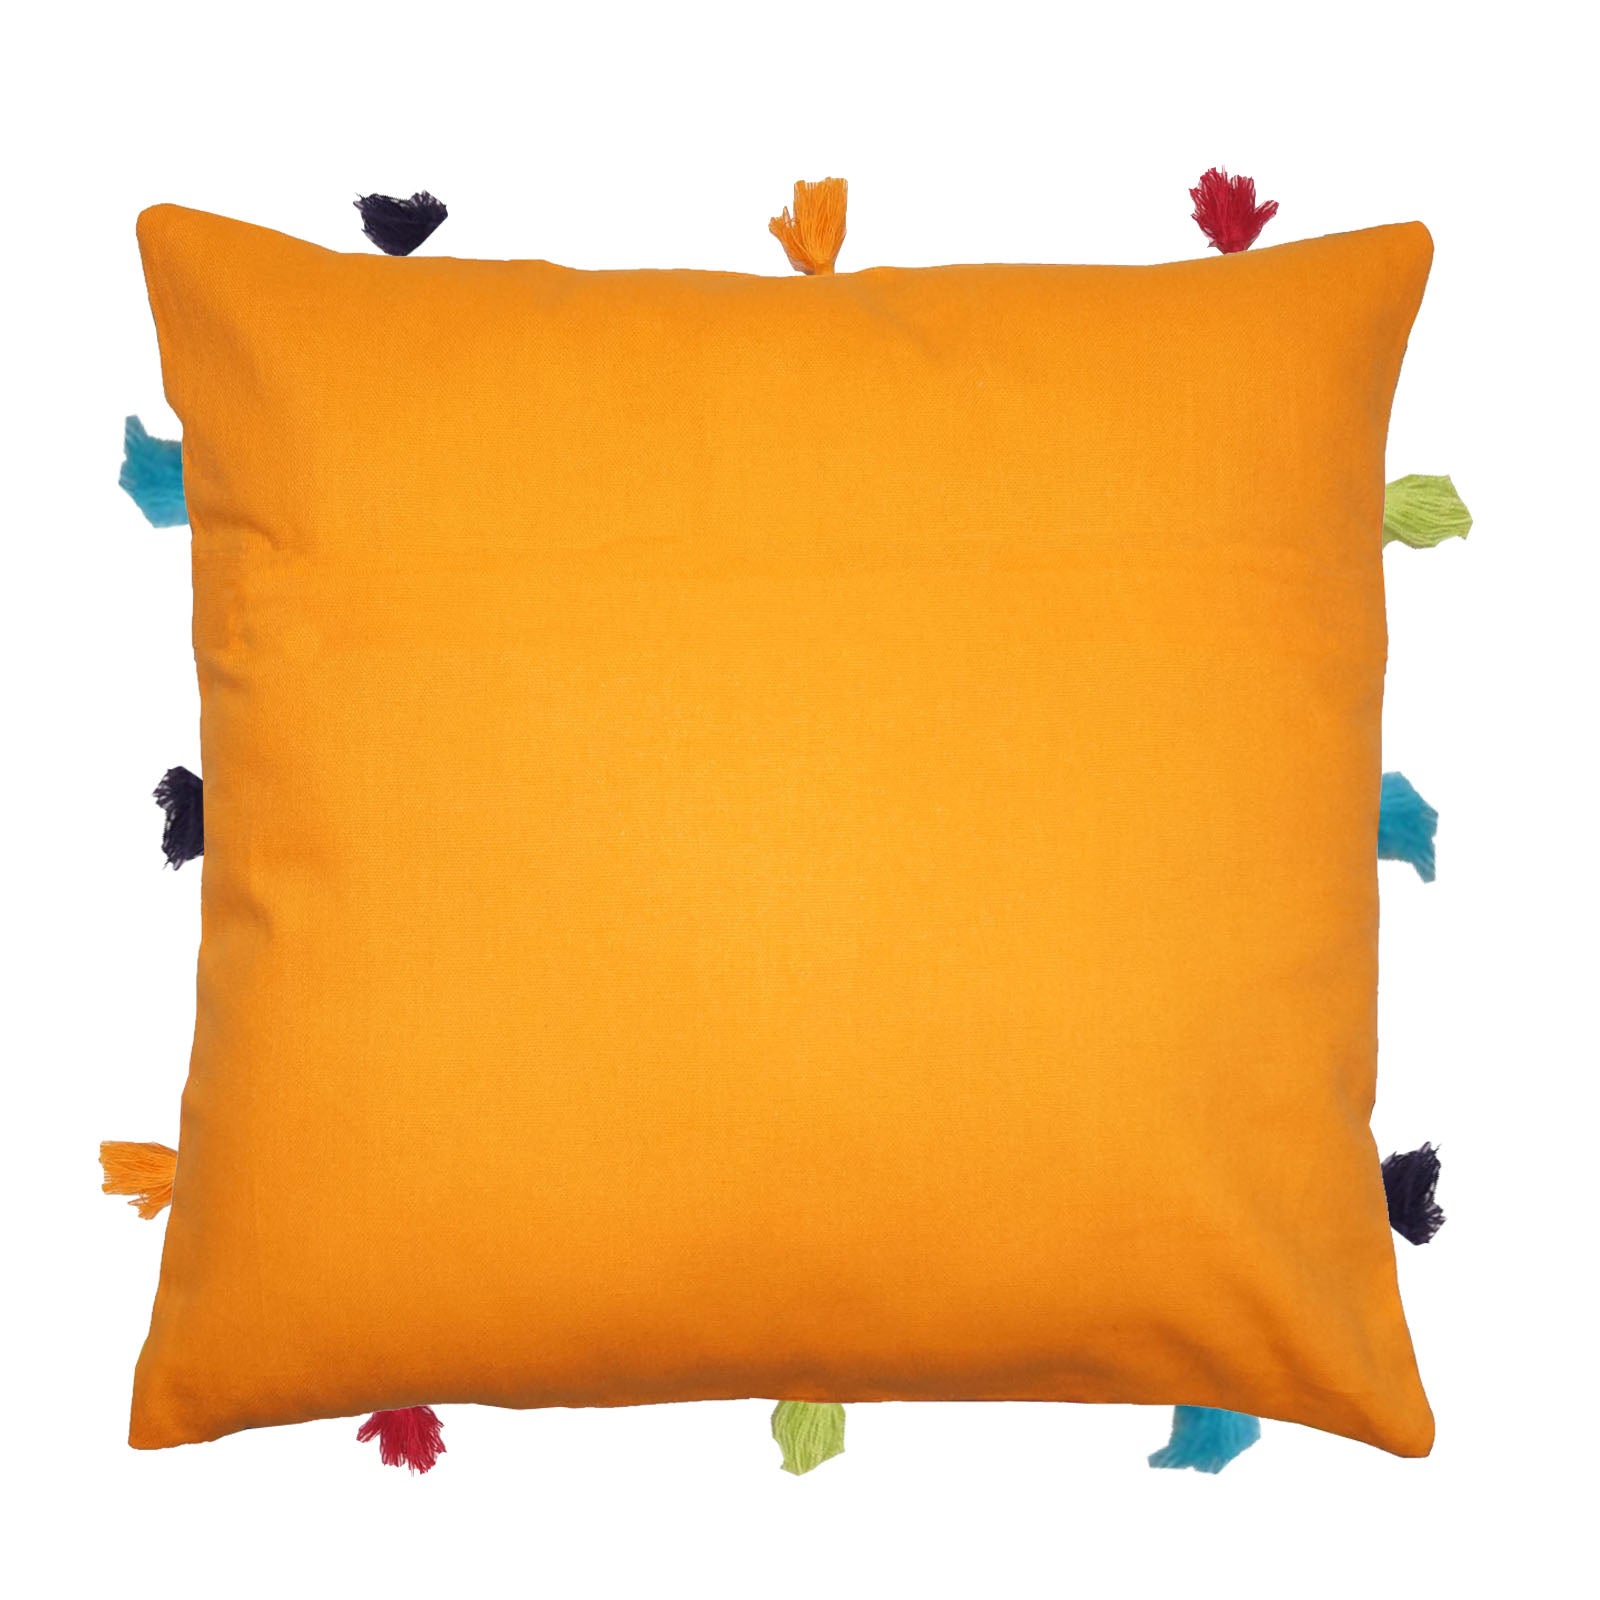 Lushomes cushion cover 12x12, boho cushion covers, sofa pillow cover, cushion covers with tassels, cushion cover with pom pom (12x12 Inches, Set of 1, orange)